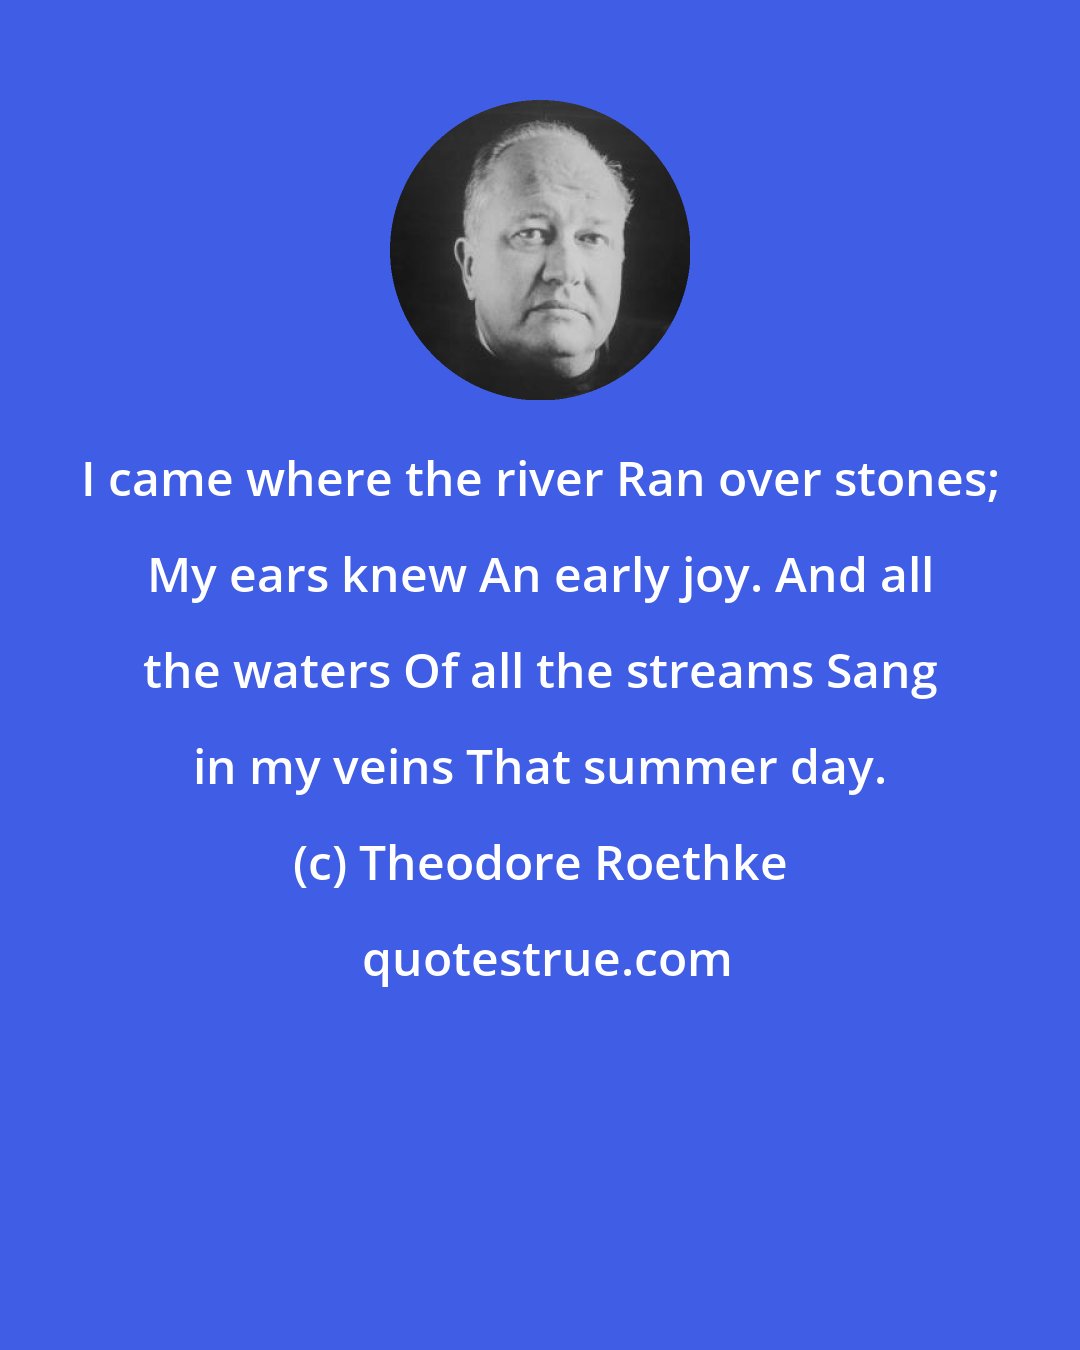 Theodore Roethke: I came where the river Ran over stones; My ears knew An early joy. And all the waters Of all the streams Sang in my veins That summer day.